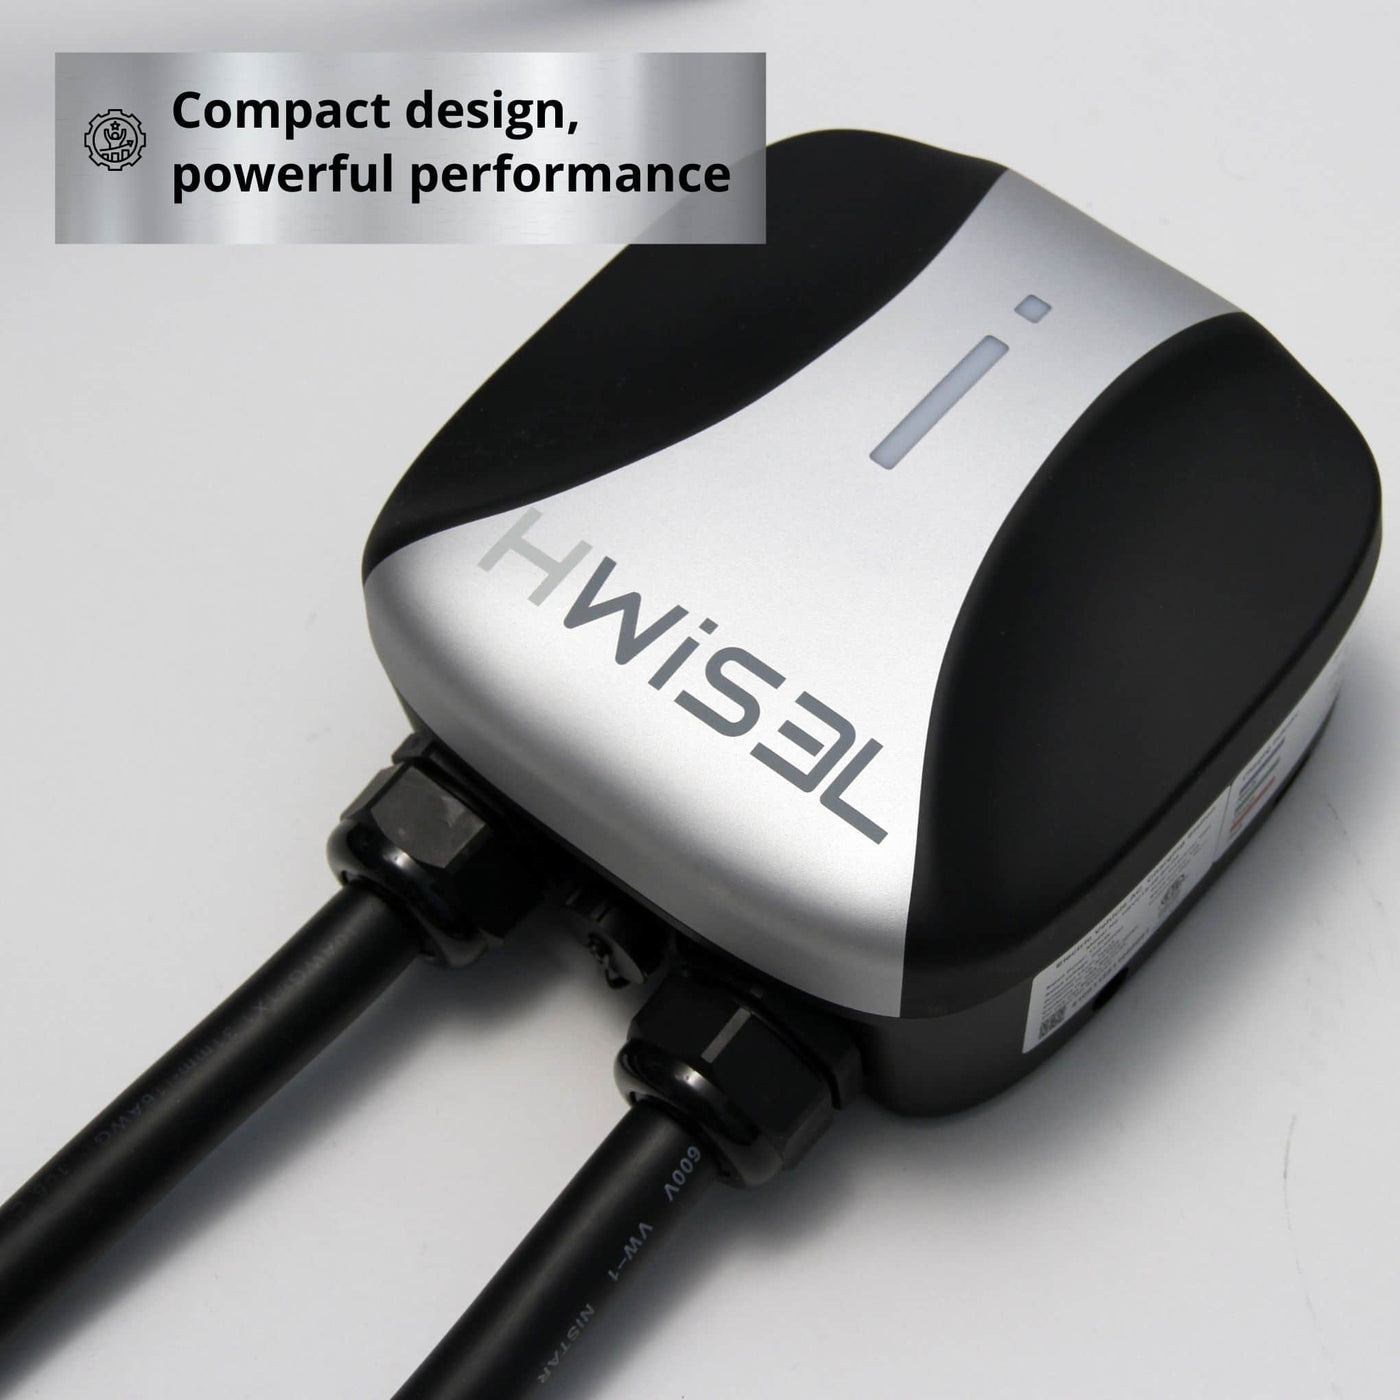 HWisel HEVC19 Smart Charging Station Image Size 2040x2040 Compact Design Powerful Performance with Charger Plan